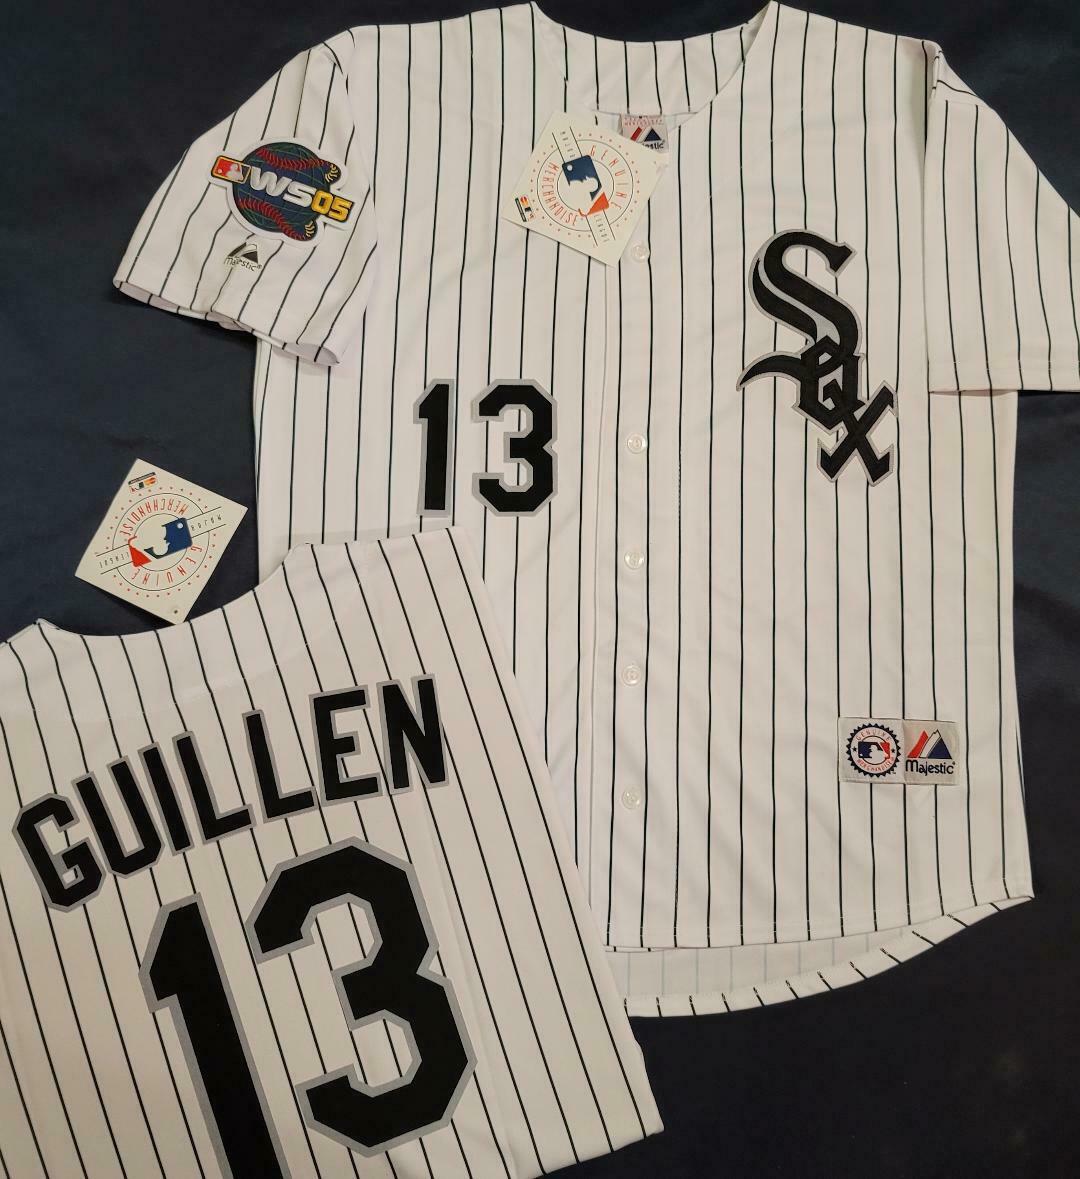 ozzie guillen jersey products for sale